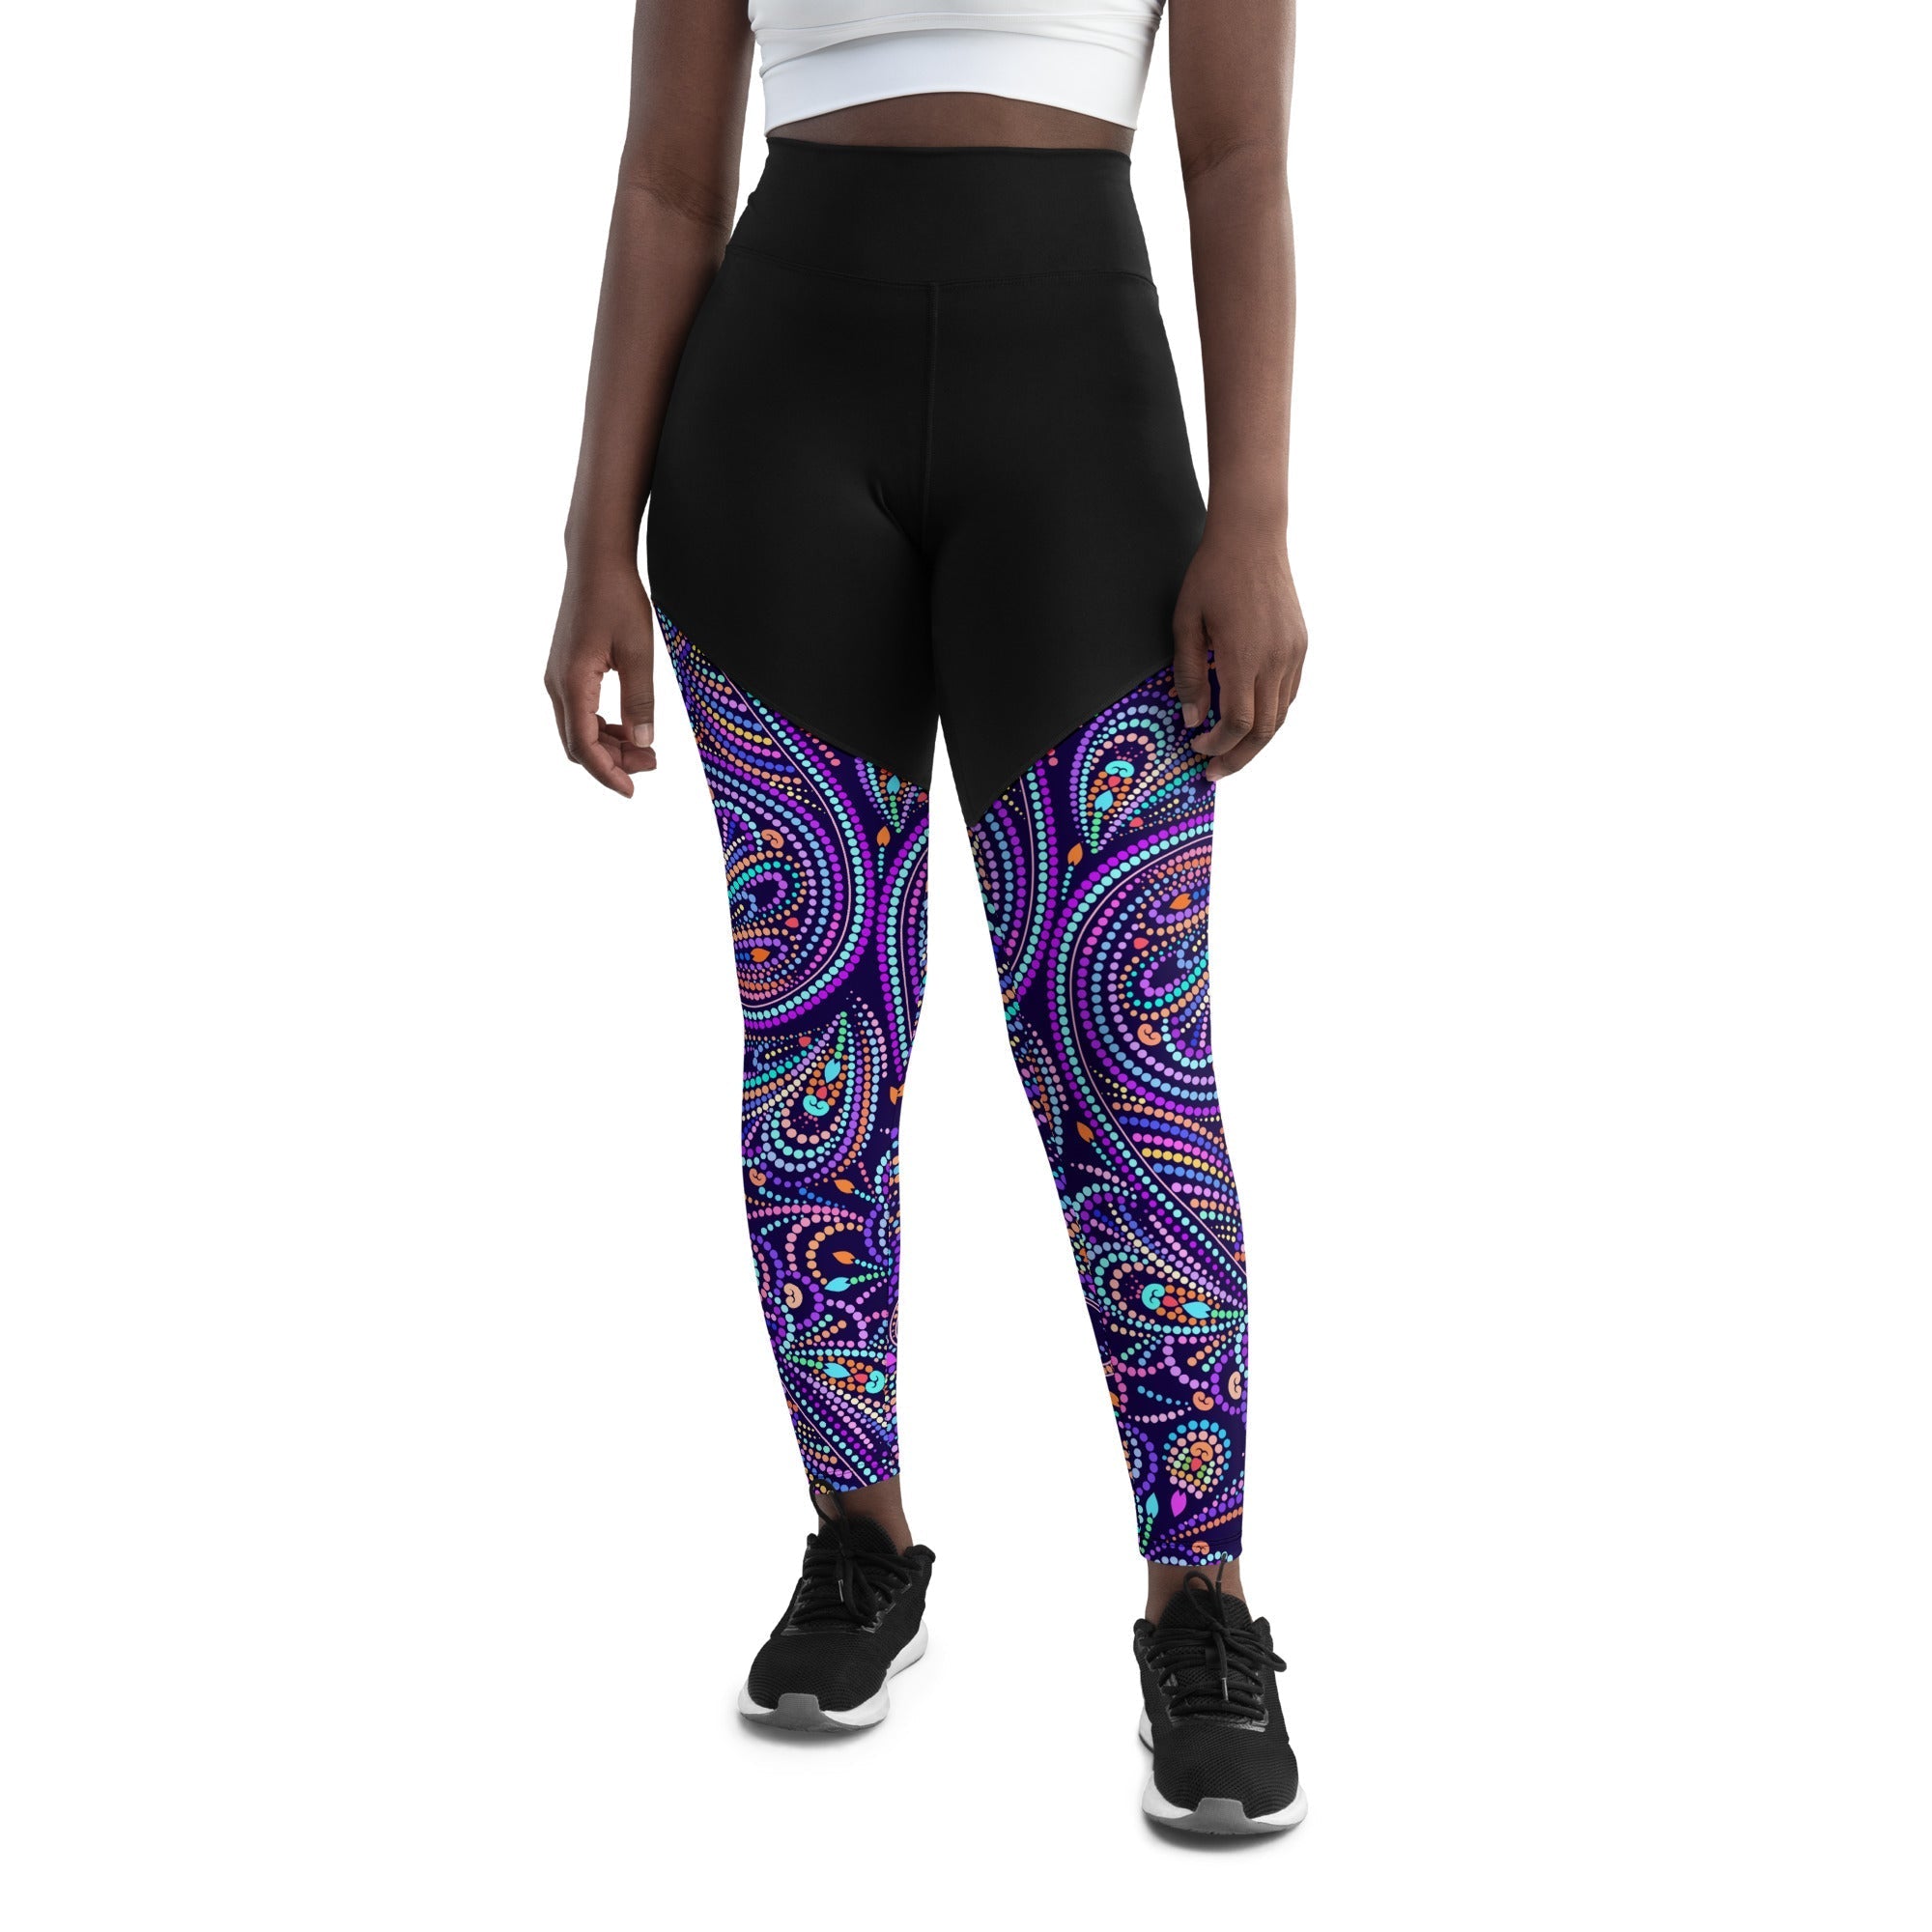 Lovely Mosaic Compression Leggings